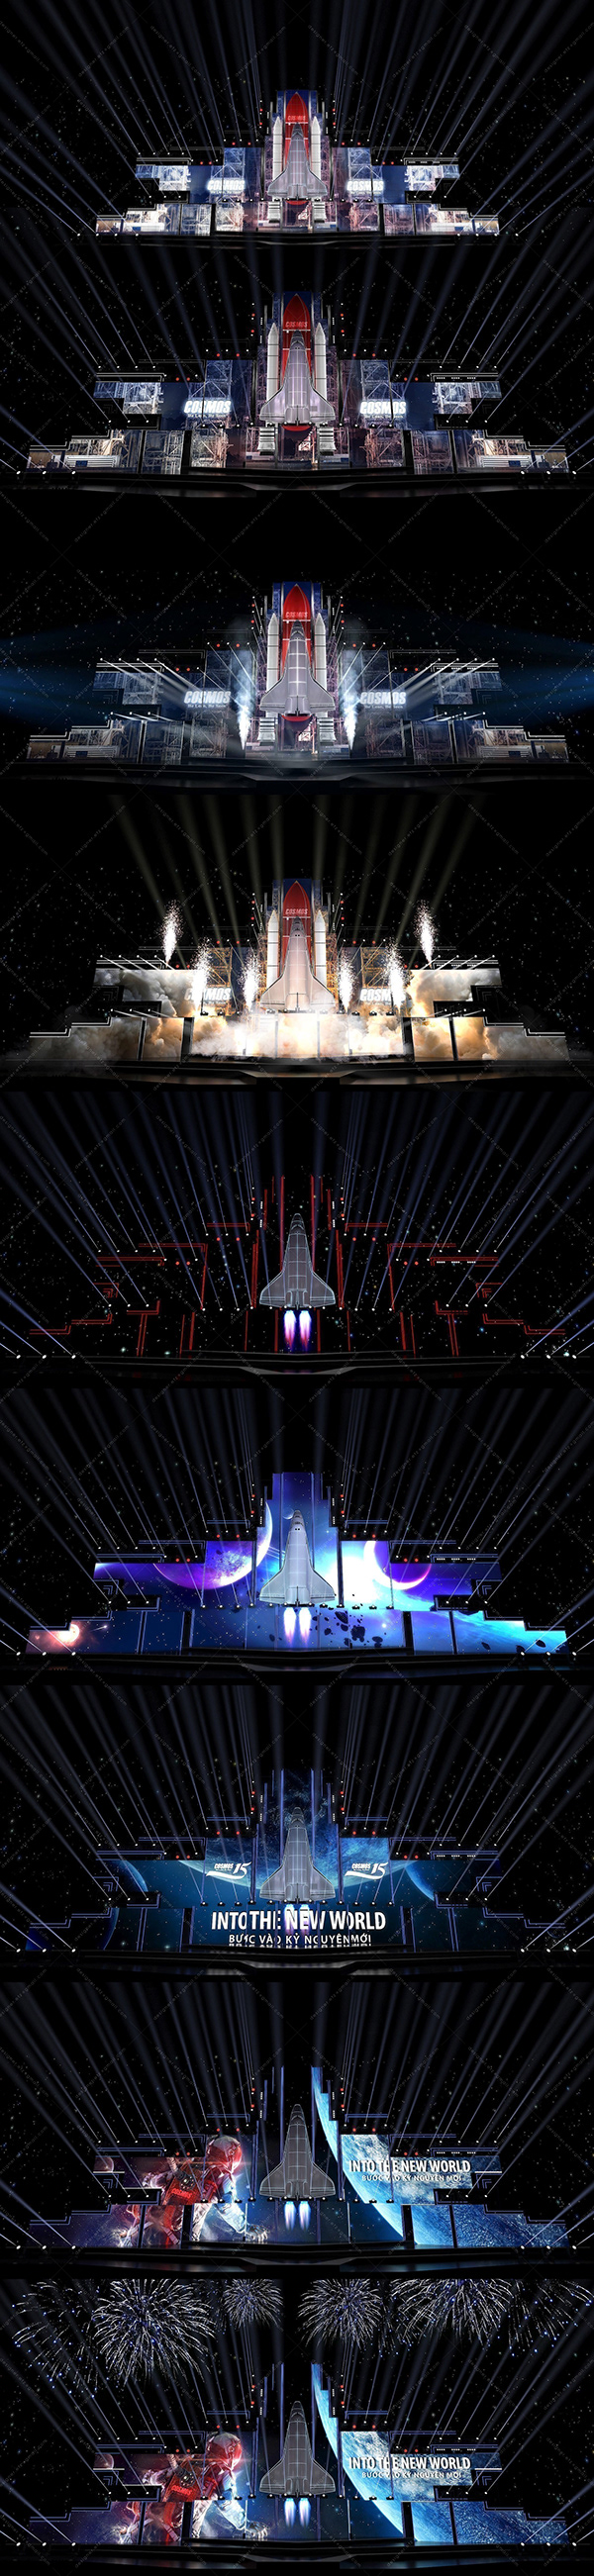 Stage Design | COSMOS - INTO THE NEW WORLD